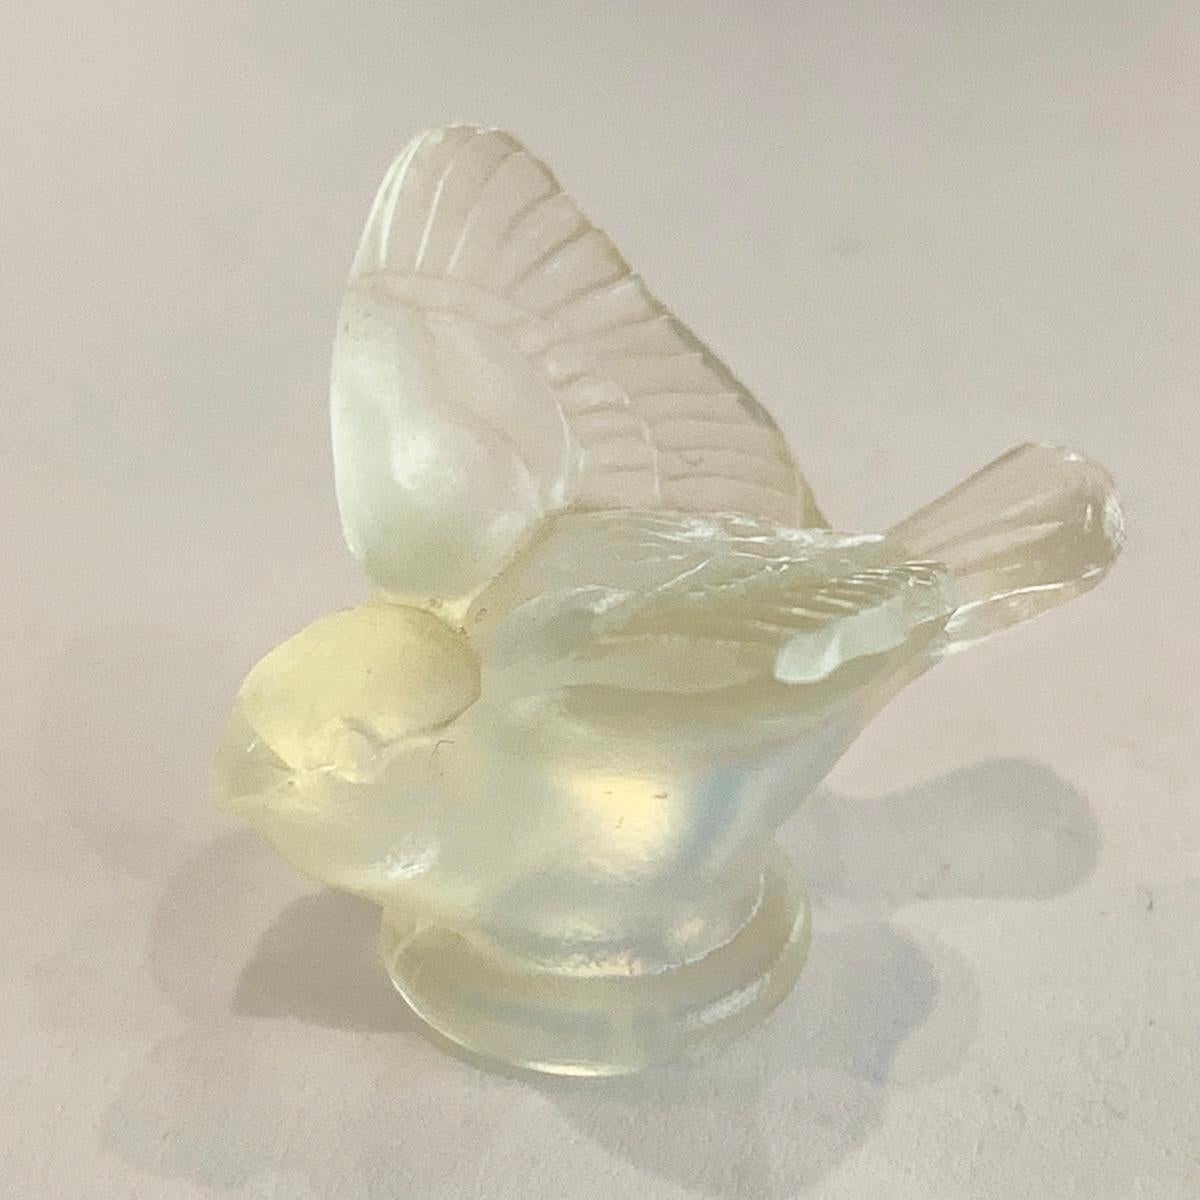 Art Deco Sabino of Paris, sparrow opalescent glass miniature, signed to base in script engraving “Sabino”. An amazing design in miniature with very fine detail. Excellent original condition with no cracks or damaged, and just a soft patina to base.